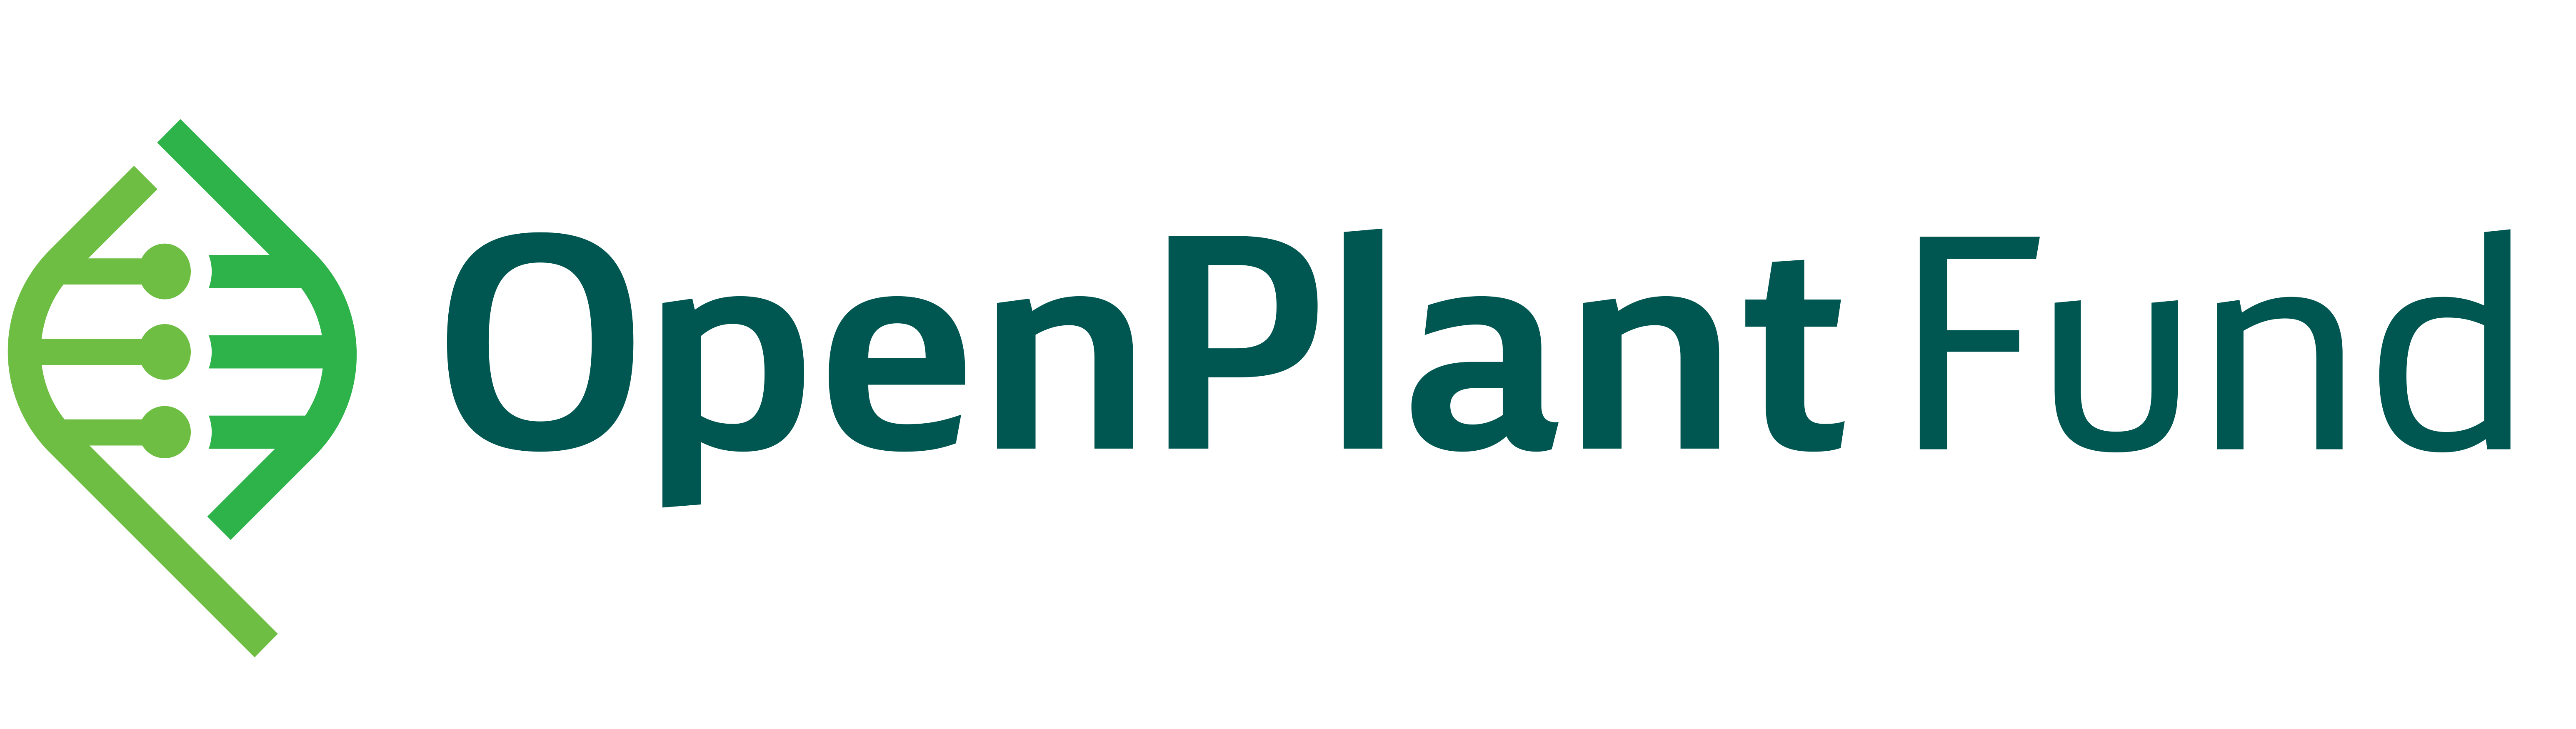 OpenPlant Fund shortlisted proposals to pitch in Norwich on Fri 1 Dec 2017